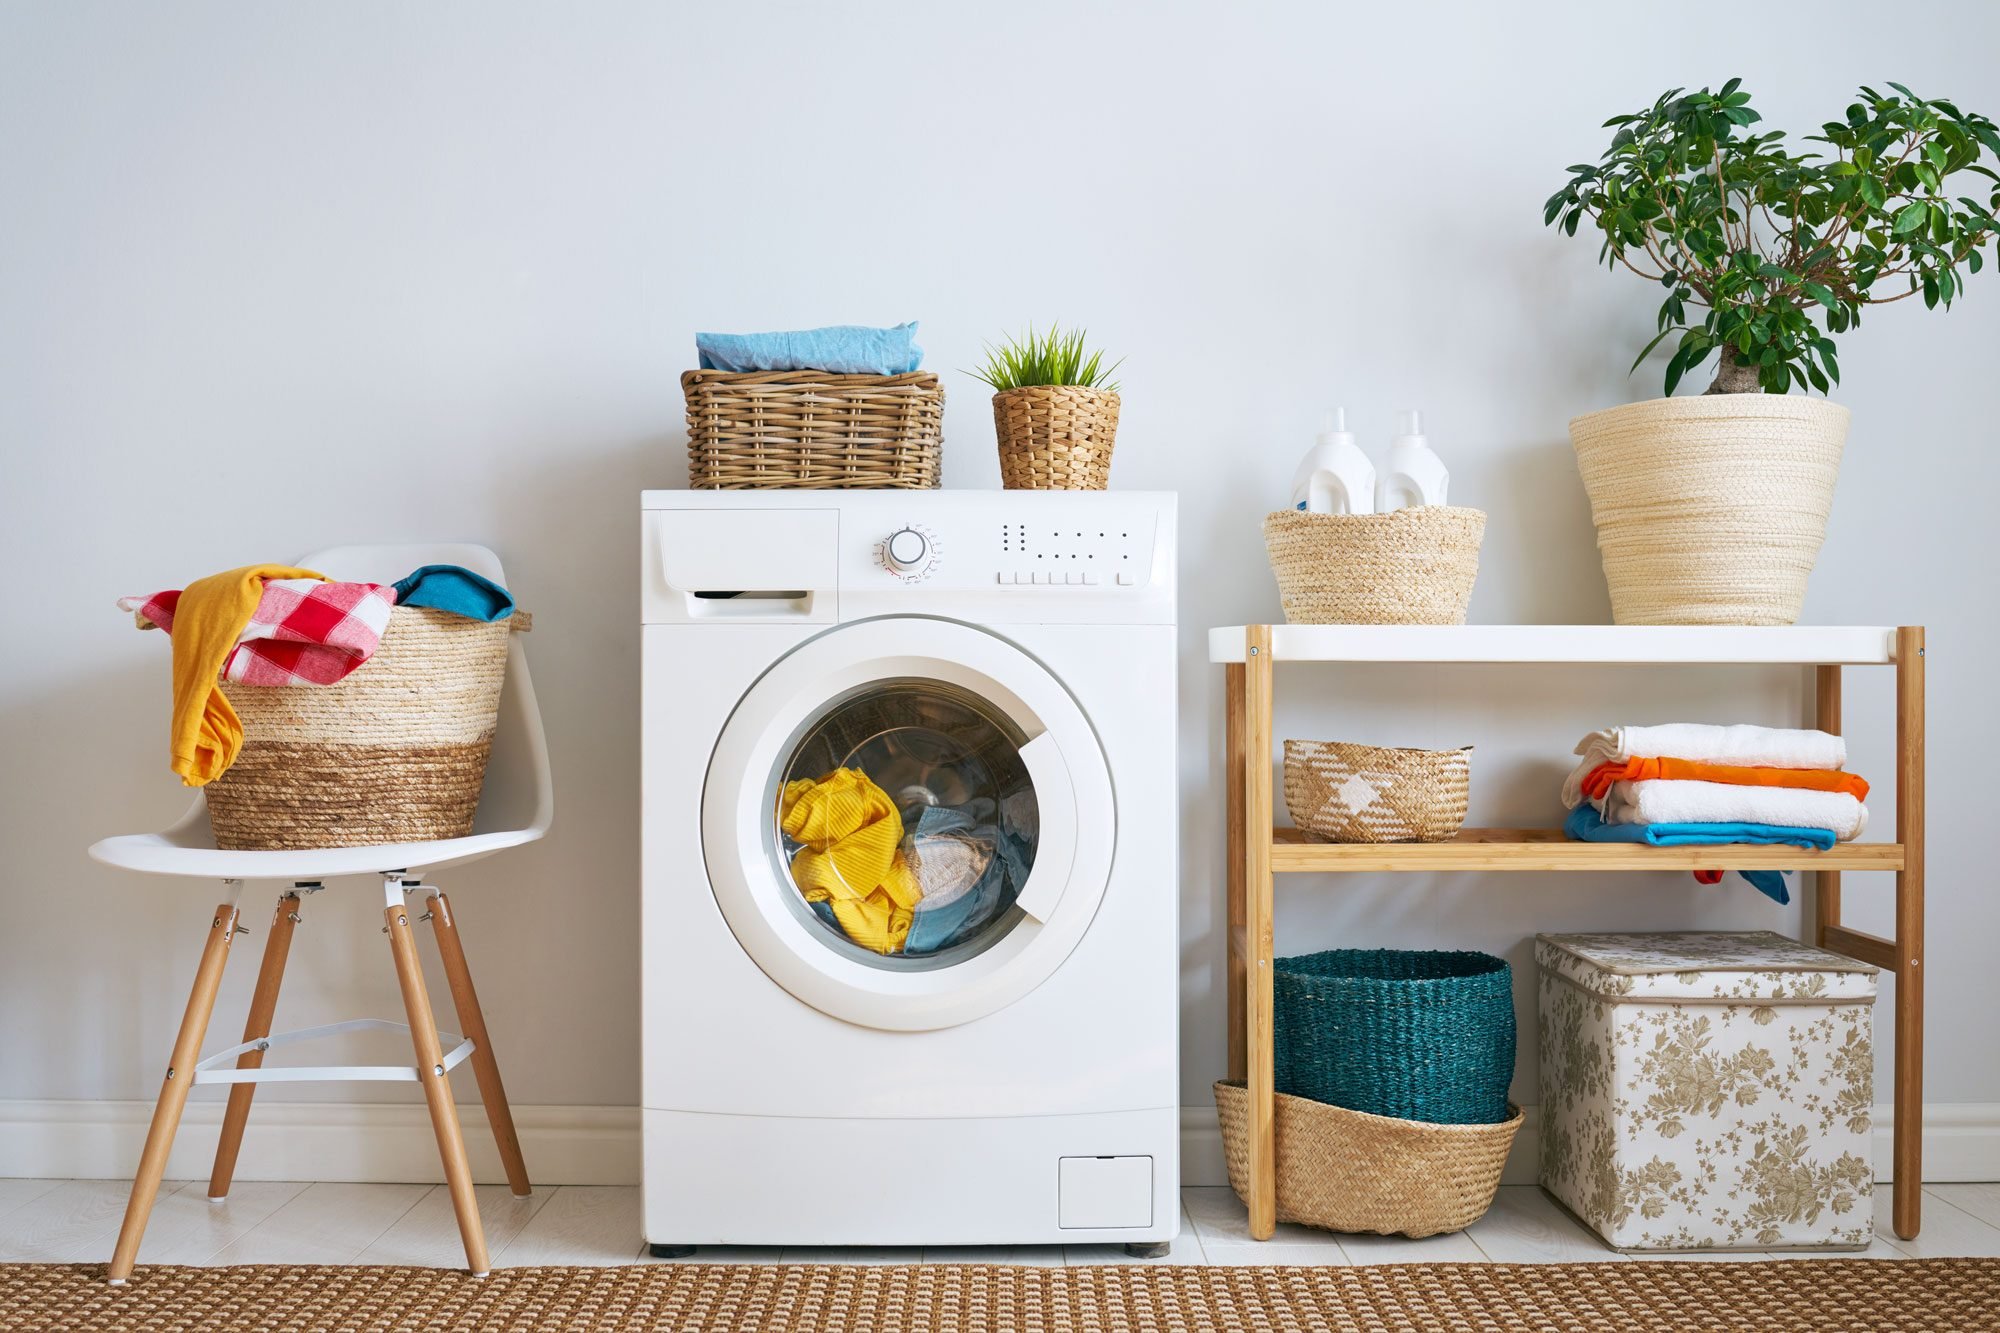 How to Do Laundry: A Step-by-Step Guide